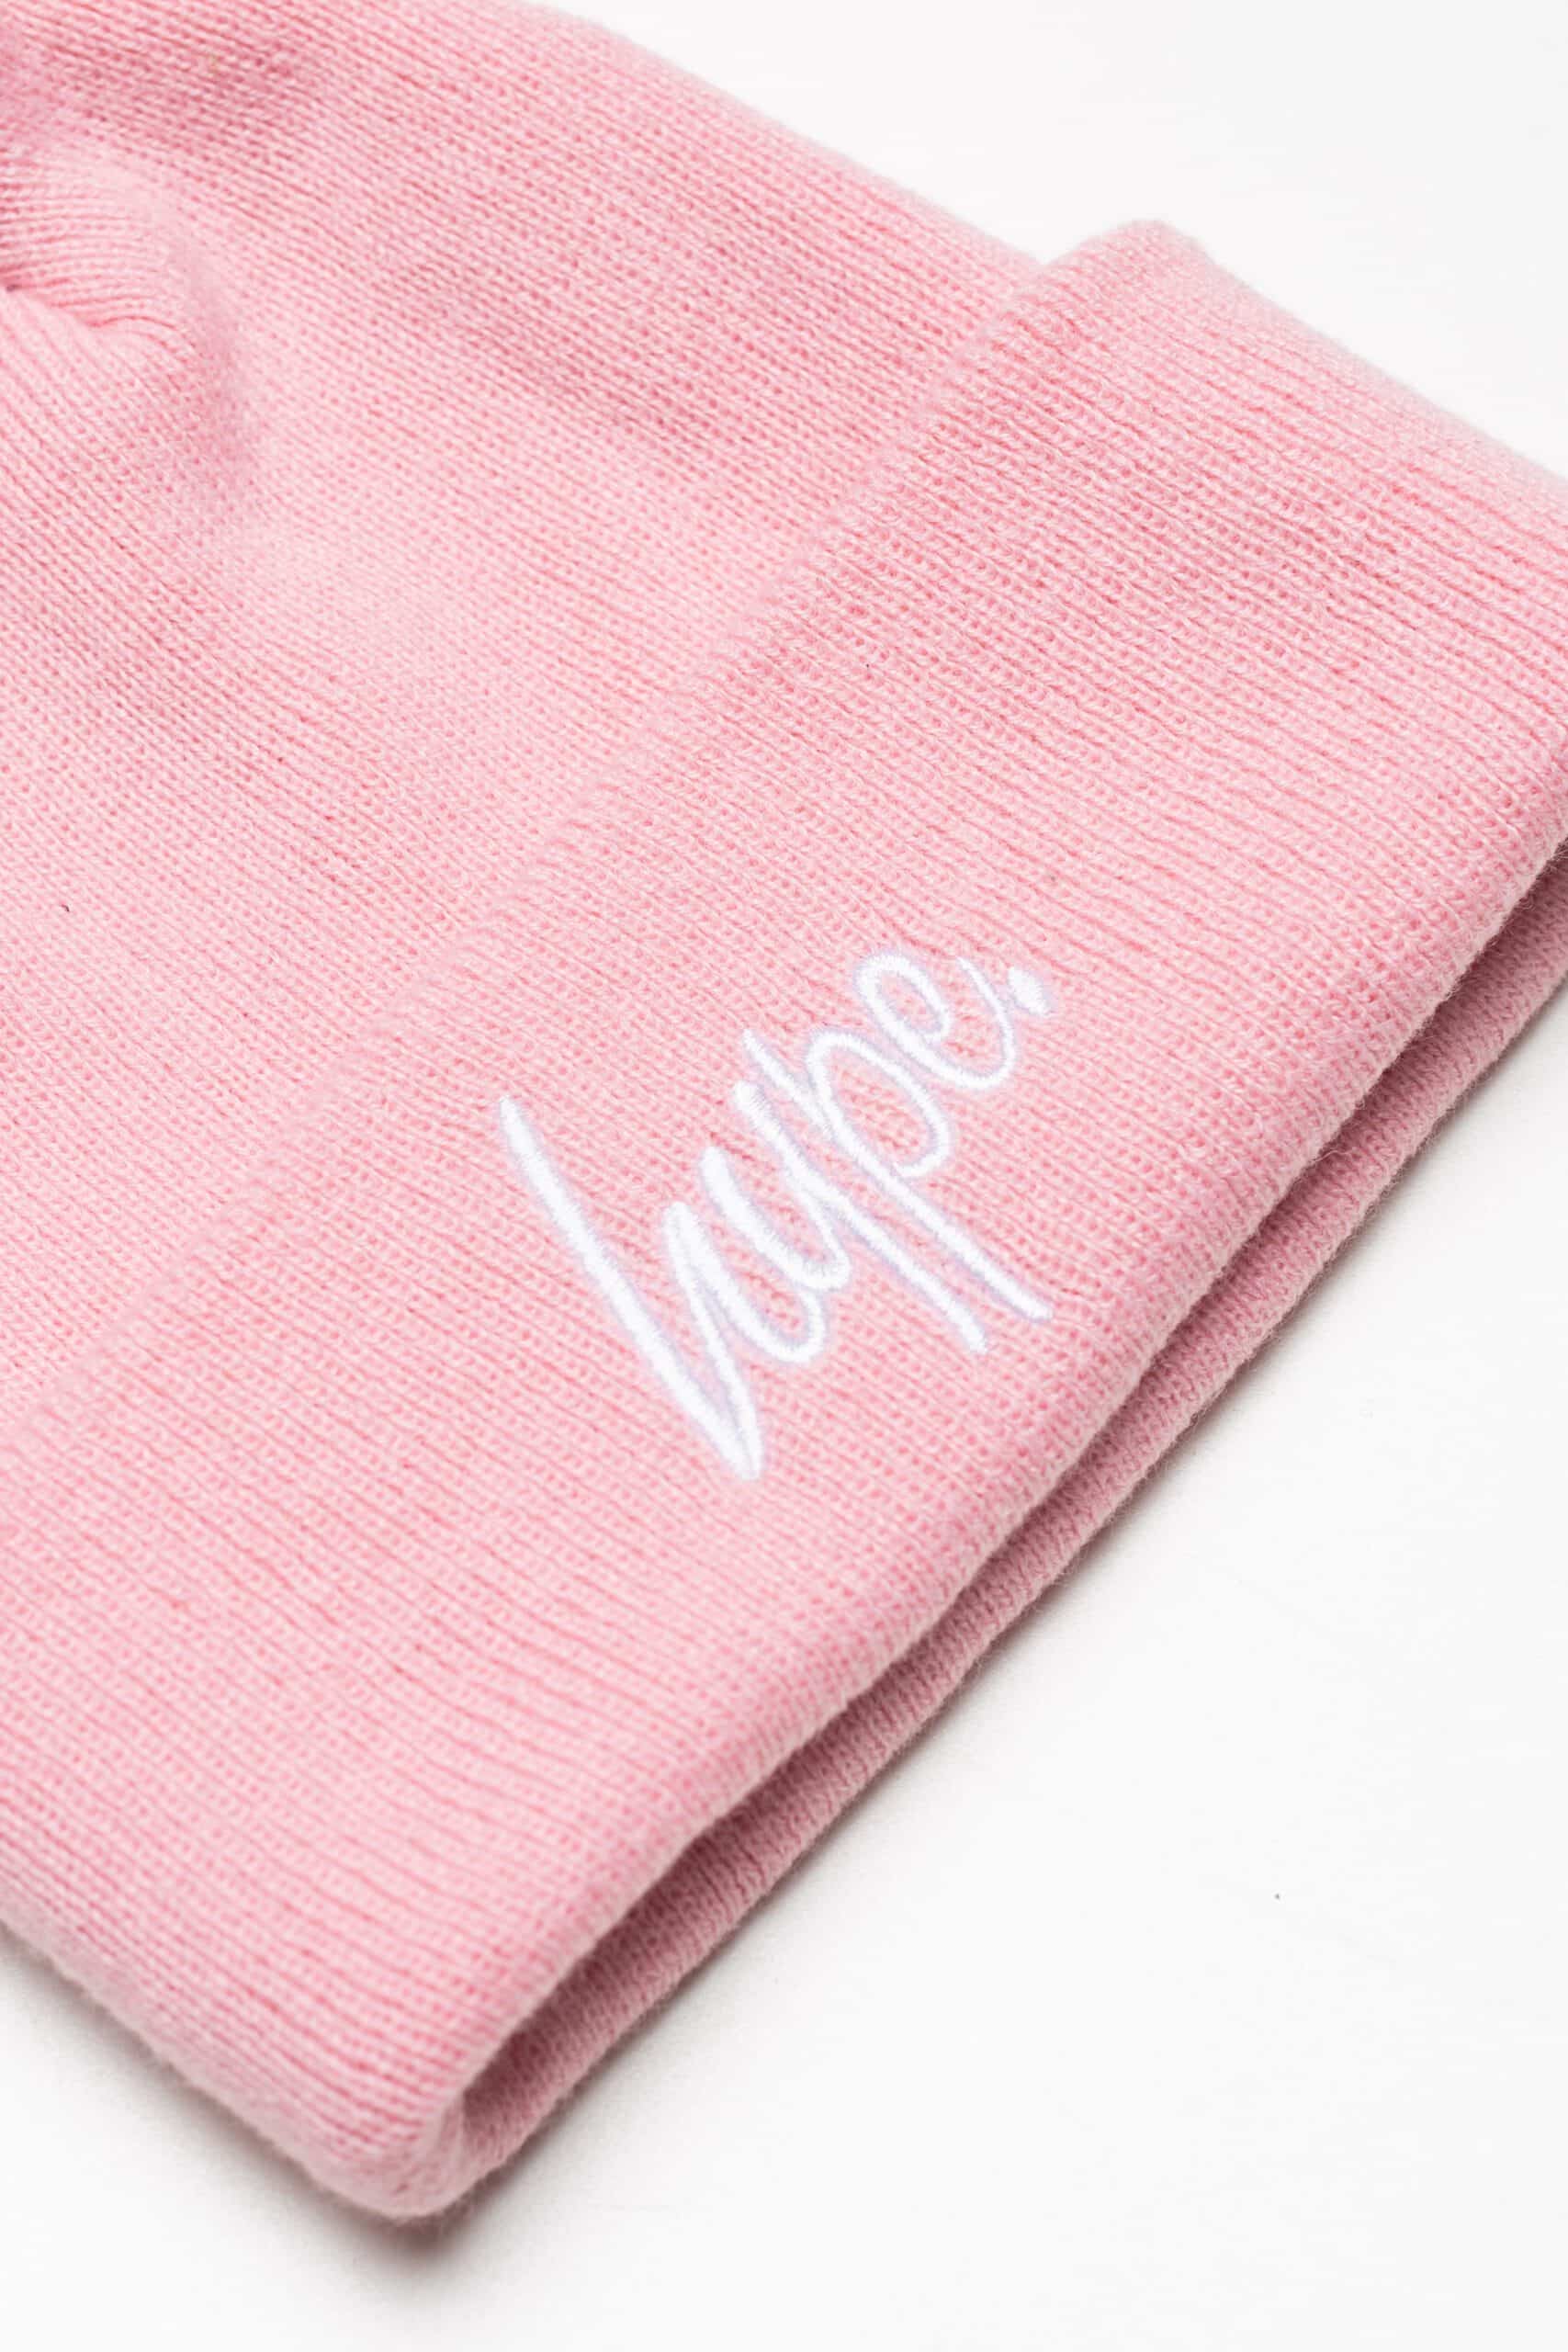 hype pale pink bobble hat close up of logo